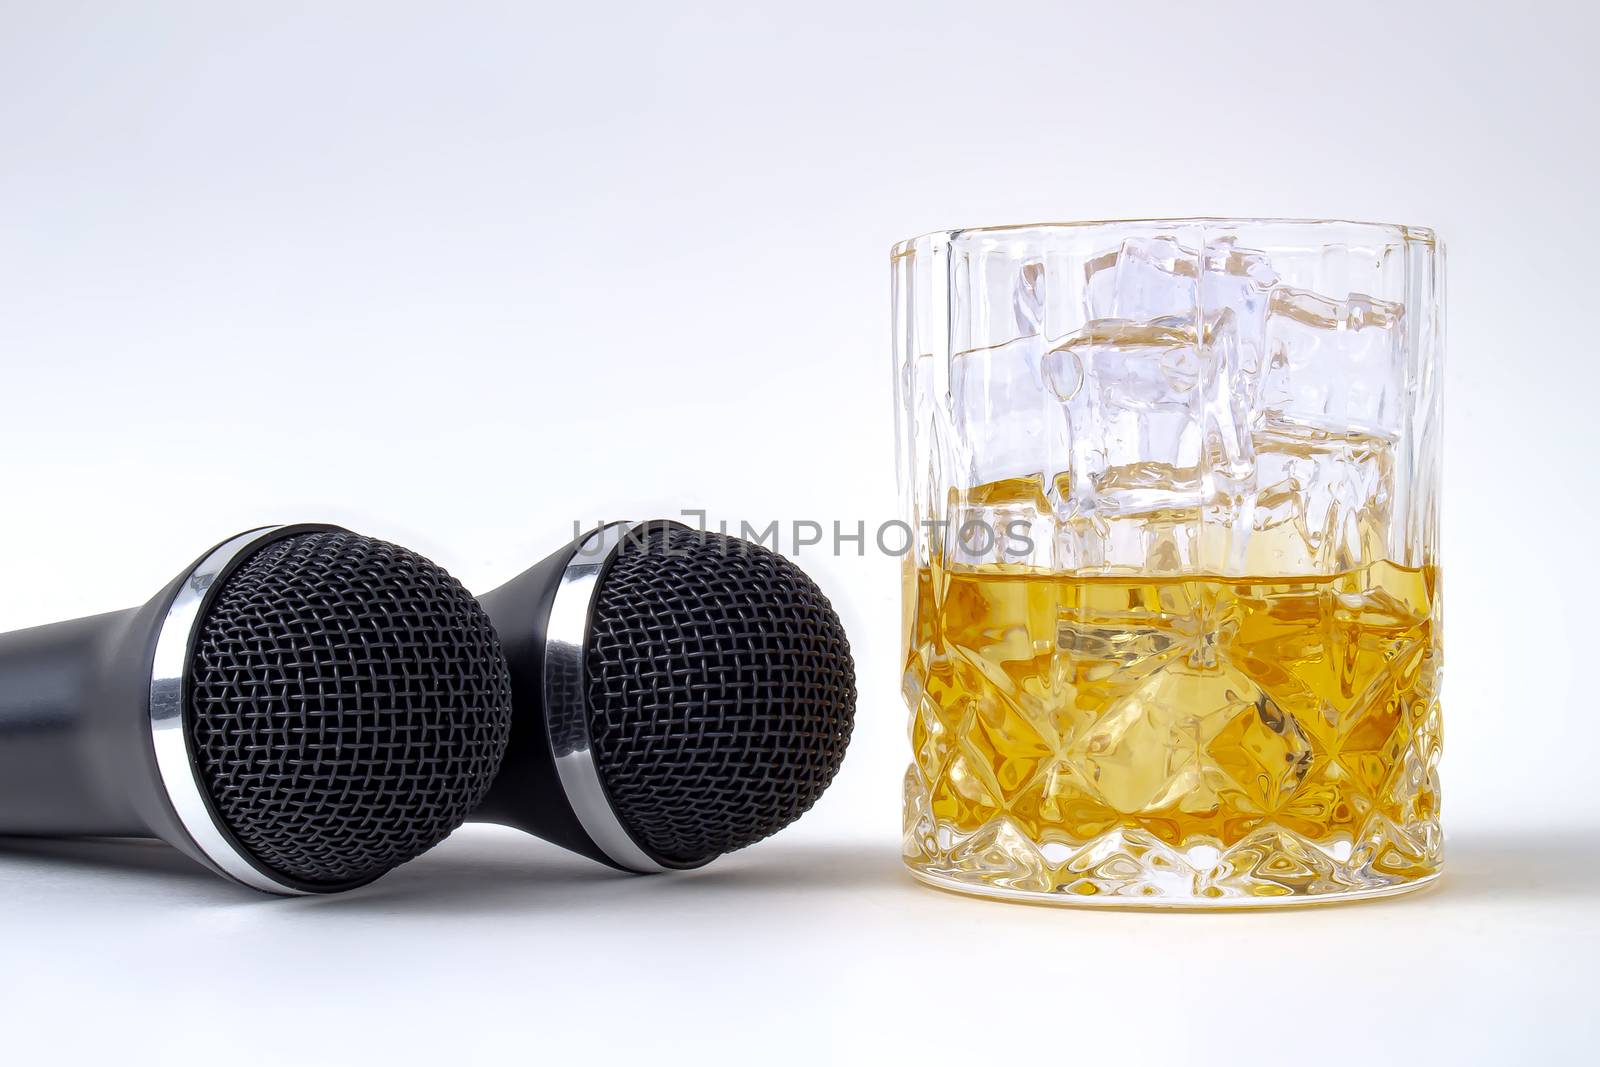 A whisky glass with ice and liquor and two karaoke microphones on a white background by oasisamuel